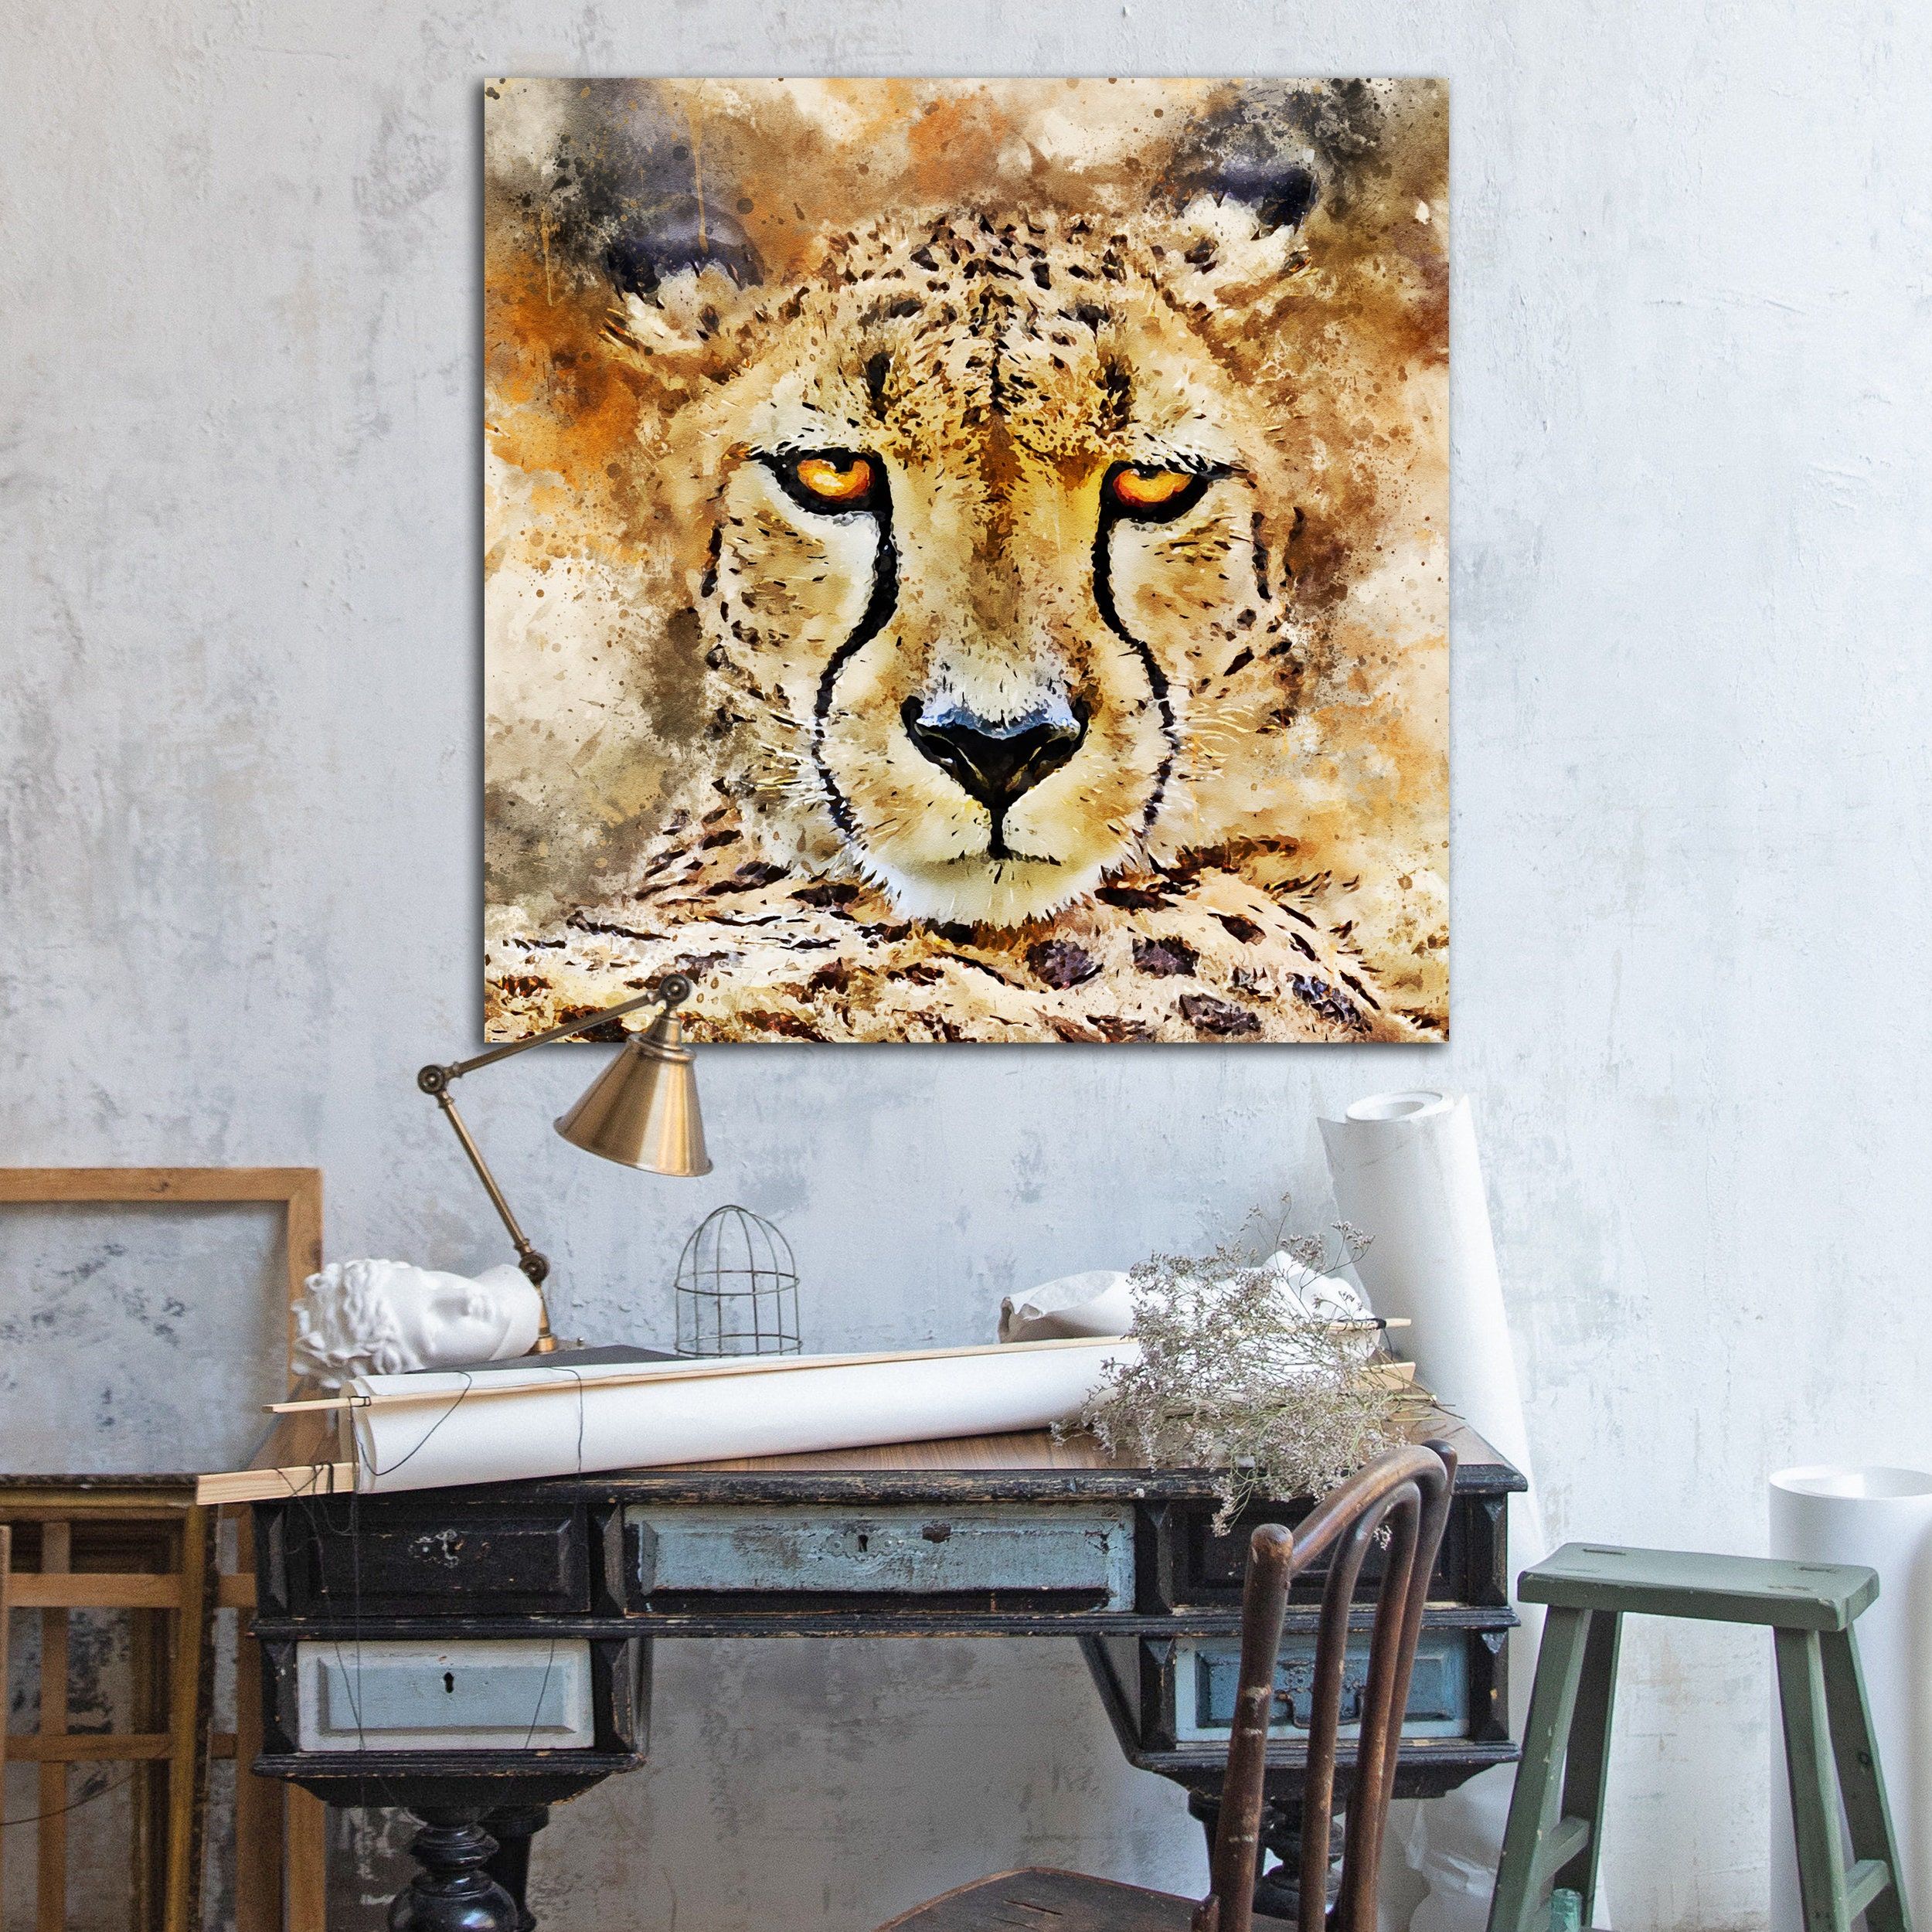 Cheetah Print – Etsy France With Regard To Most Recent Cheetah Wall Art (Gallery 20 of 20)